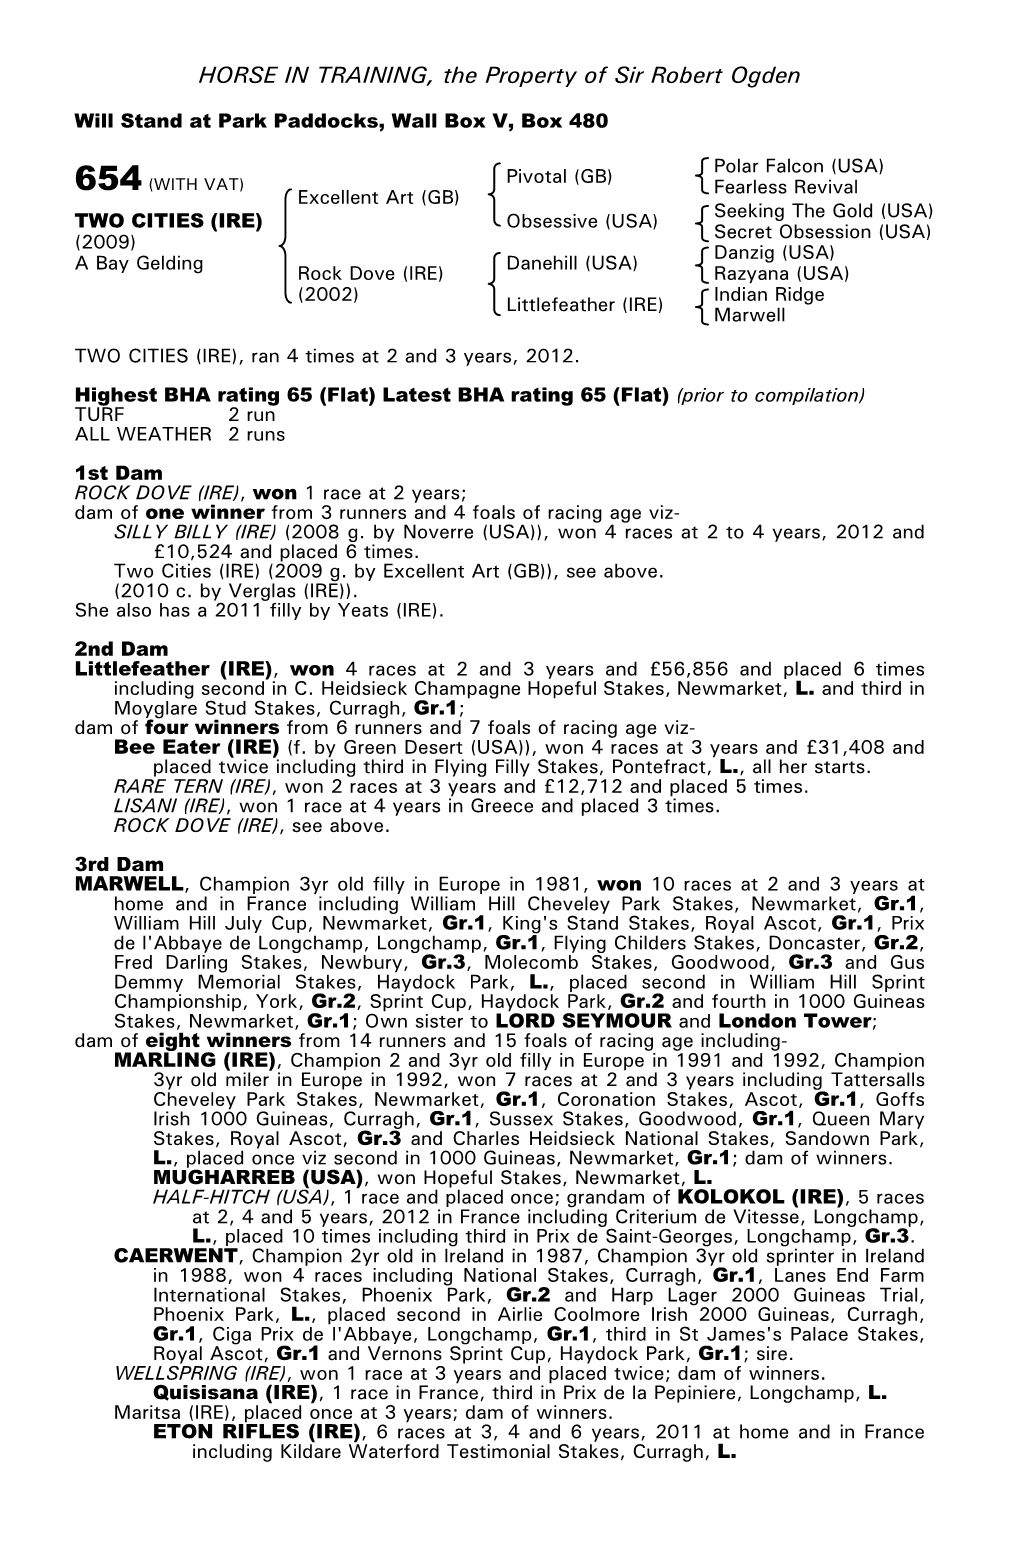 HORSE in TRAINING, the Property of Sir Robert Ogden